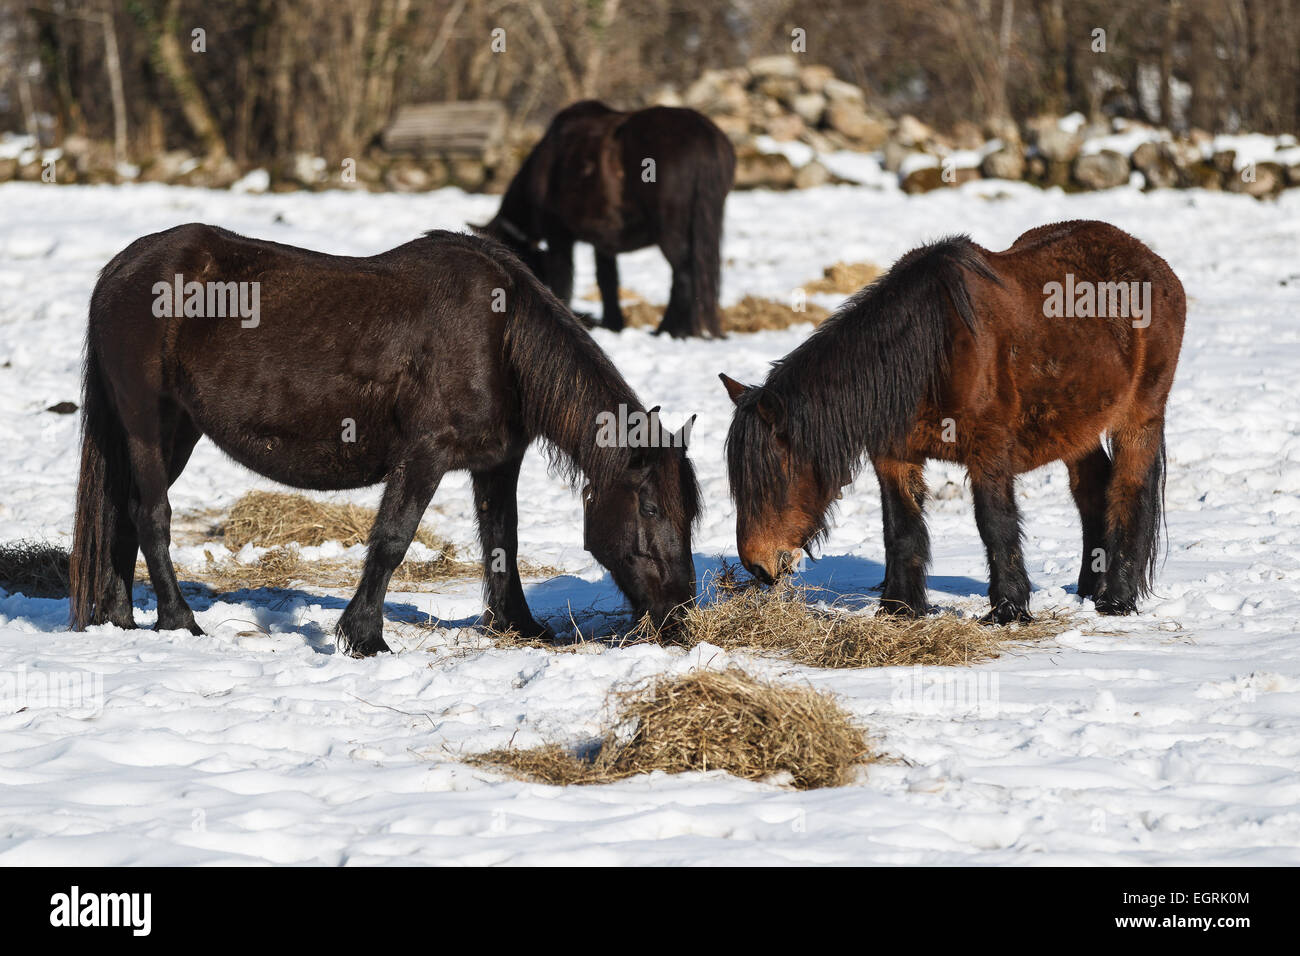 Some horses eating on the snowy terrain in Cabuérniga, Cantabria, Spain. Stock Photo